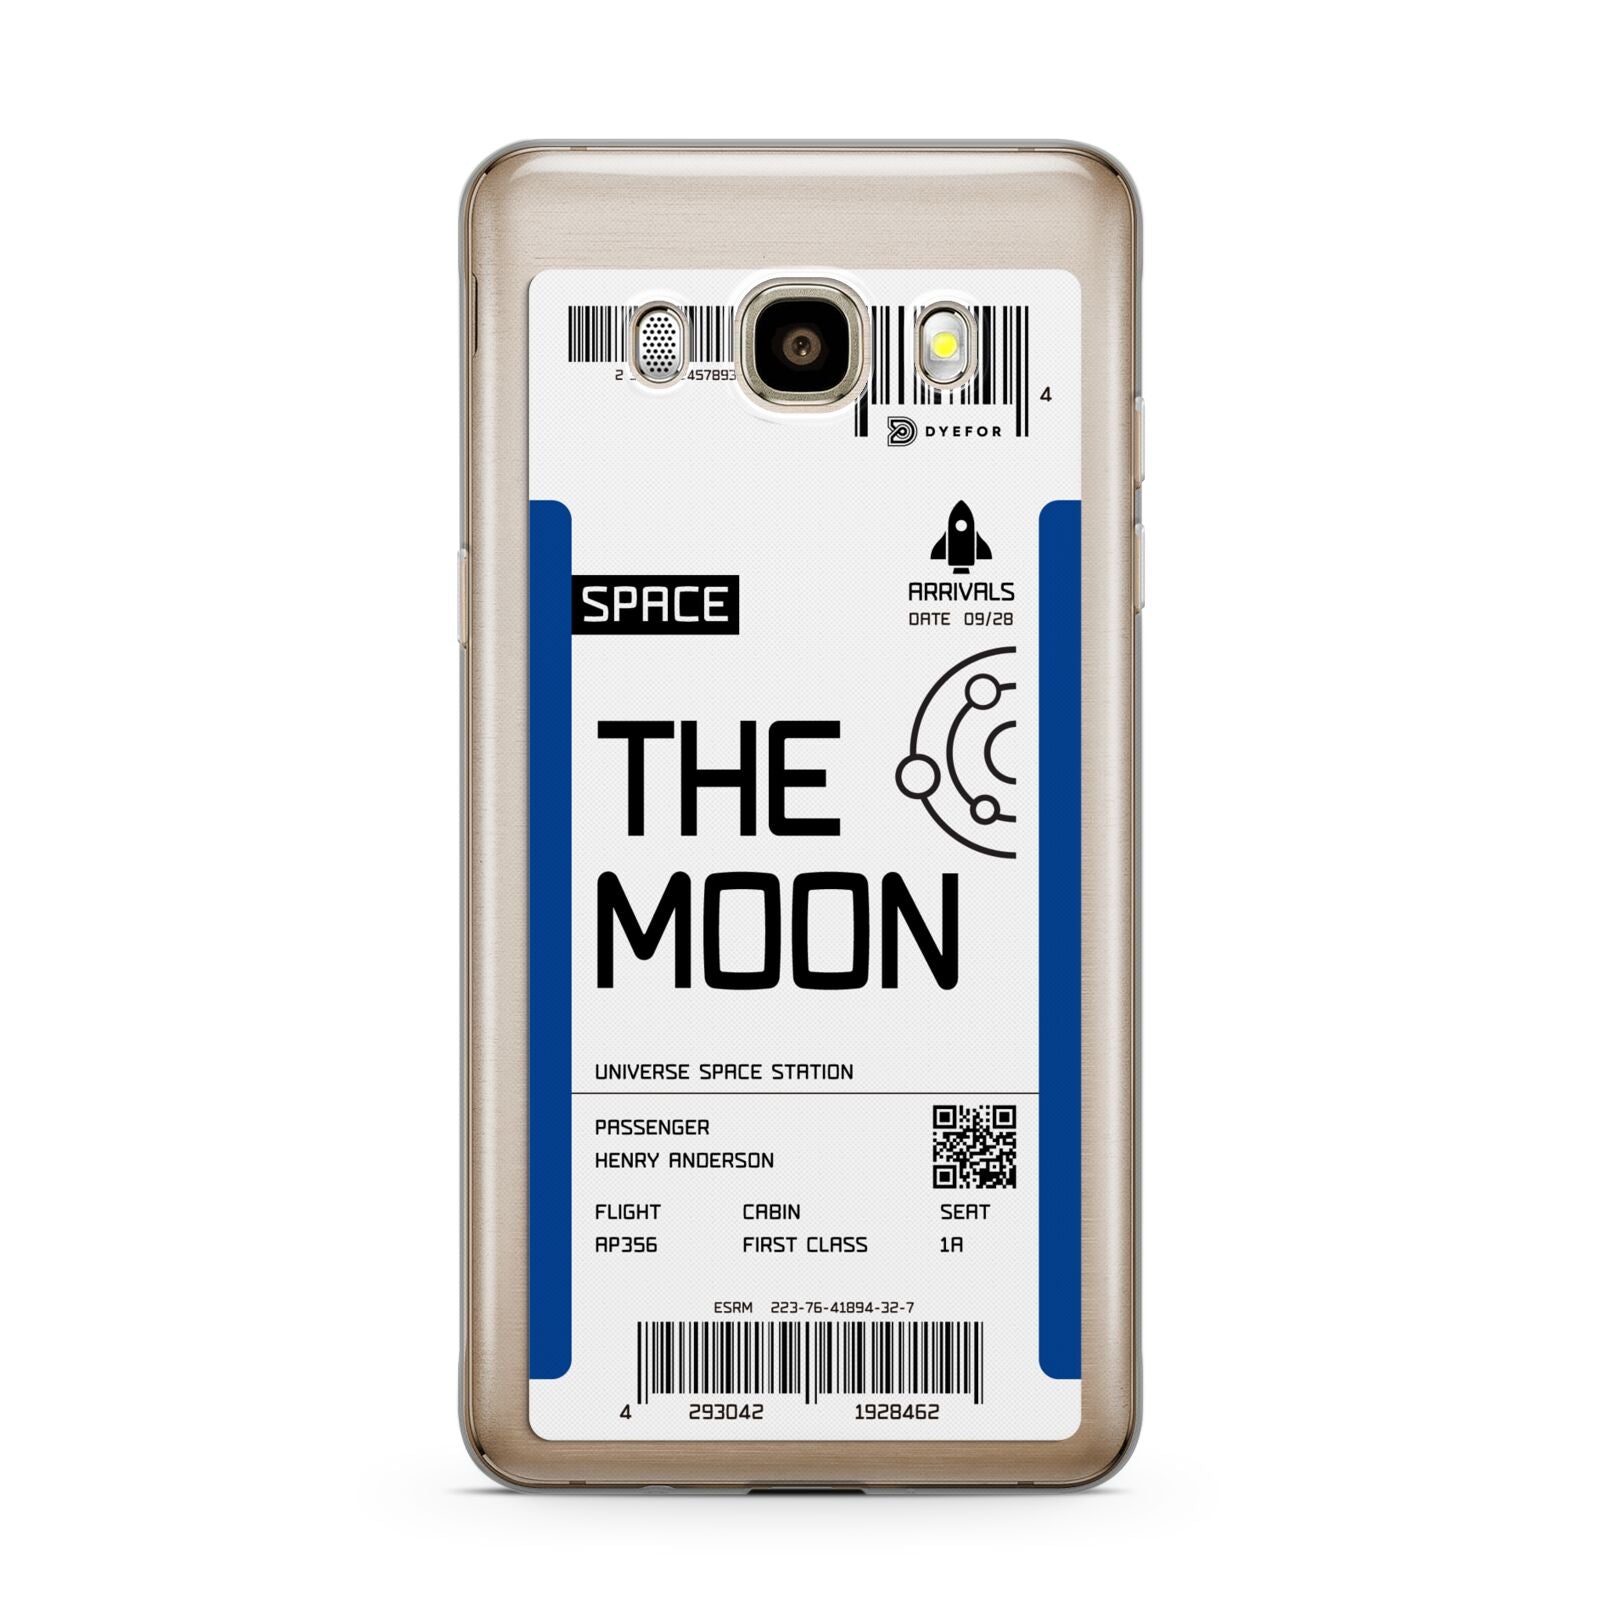 The Moon Boarding Pass Samsung Galaxy J7 2016 Case on gold phone